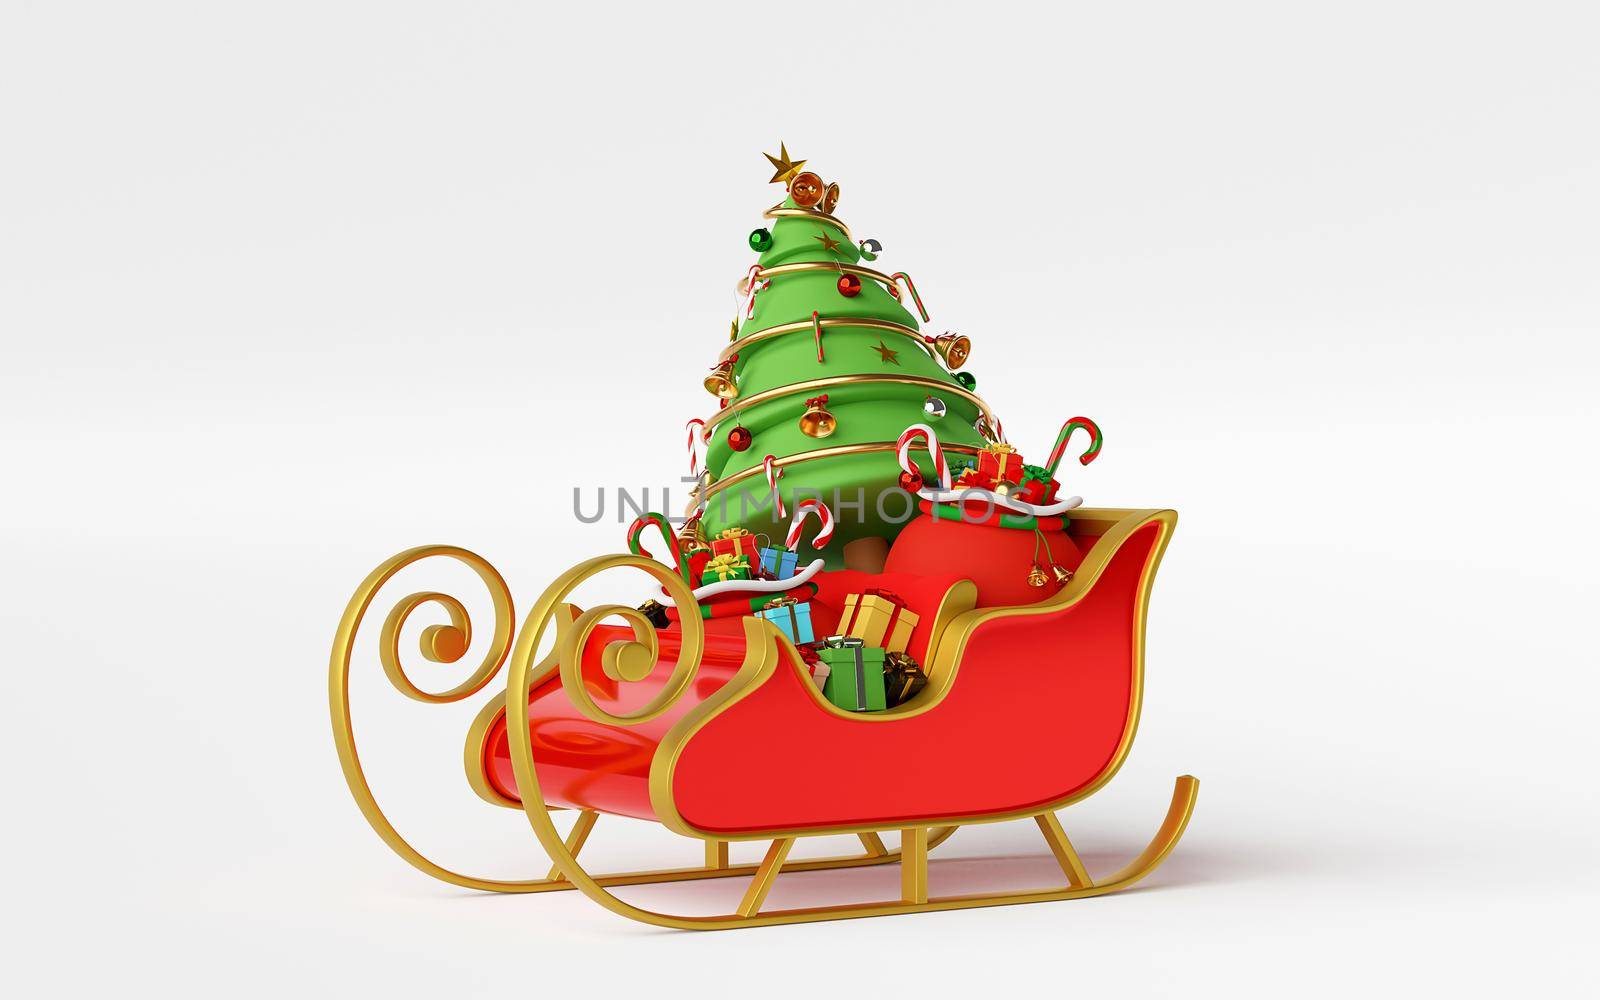 Scene of Sleigh full of Christmas gifts and Christmas tree, 3d rendering by nutzchotwarut